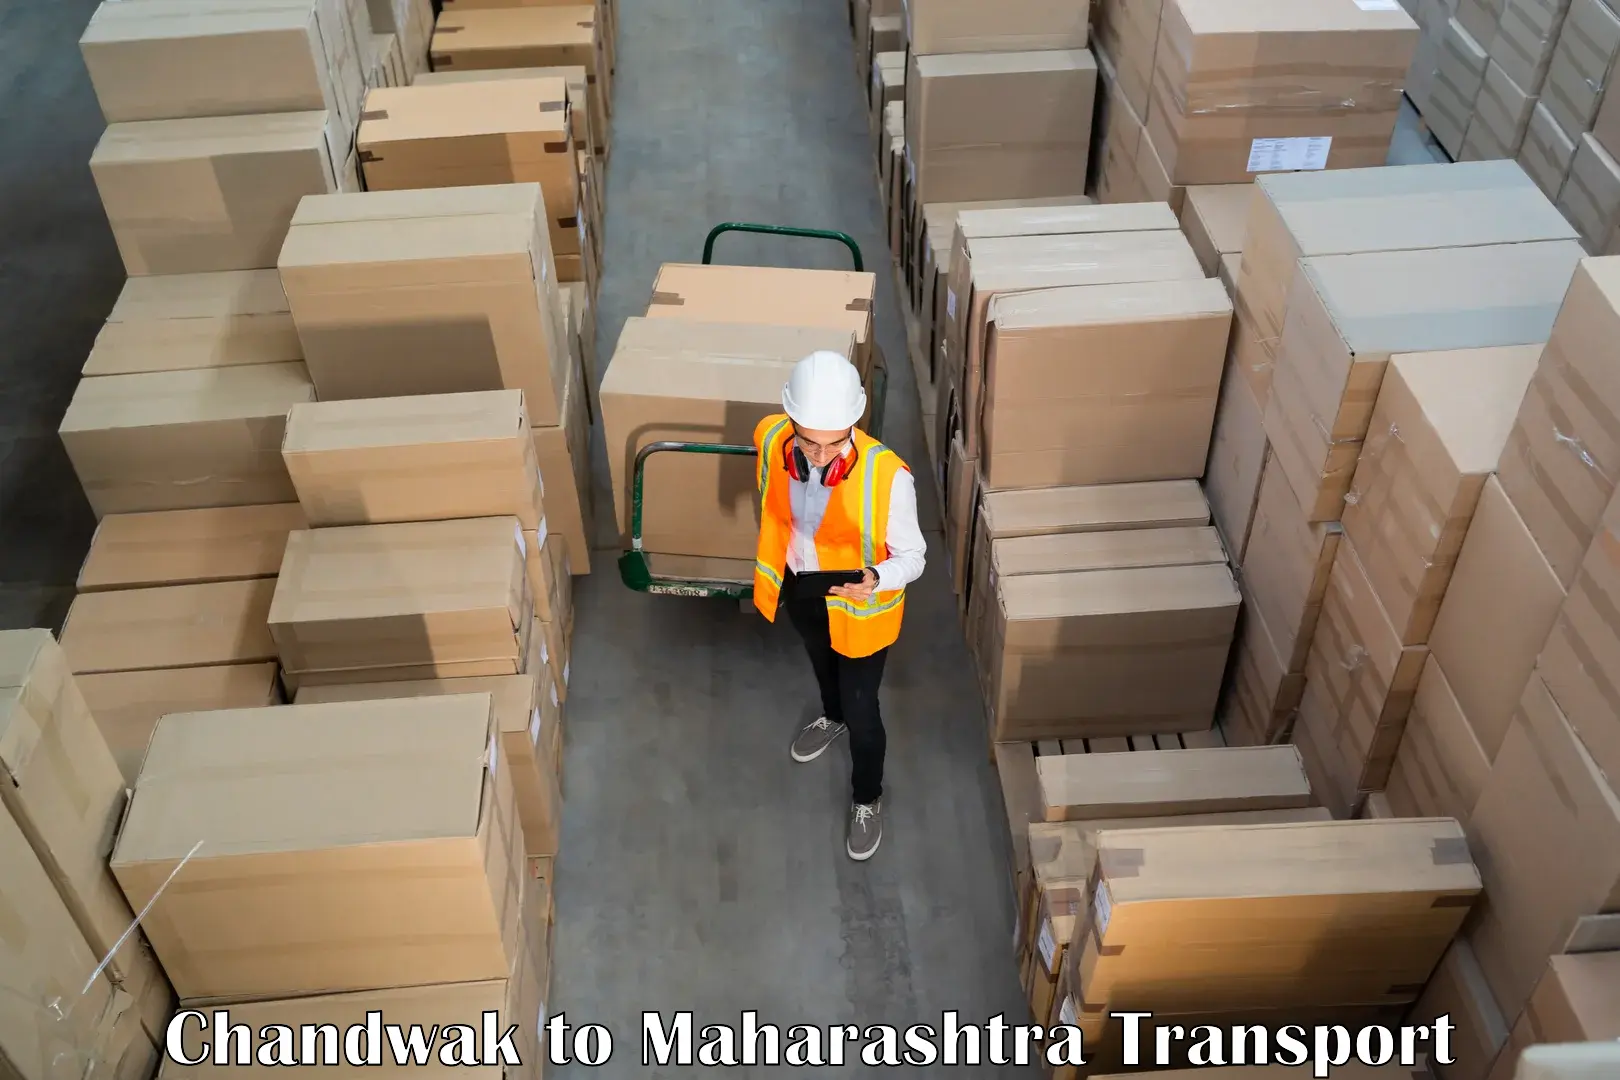 Goods delivery service Chandwak to Jamkhed